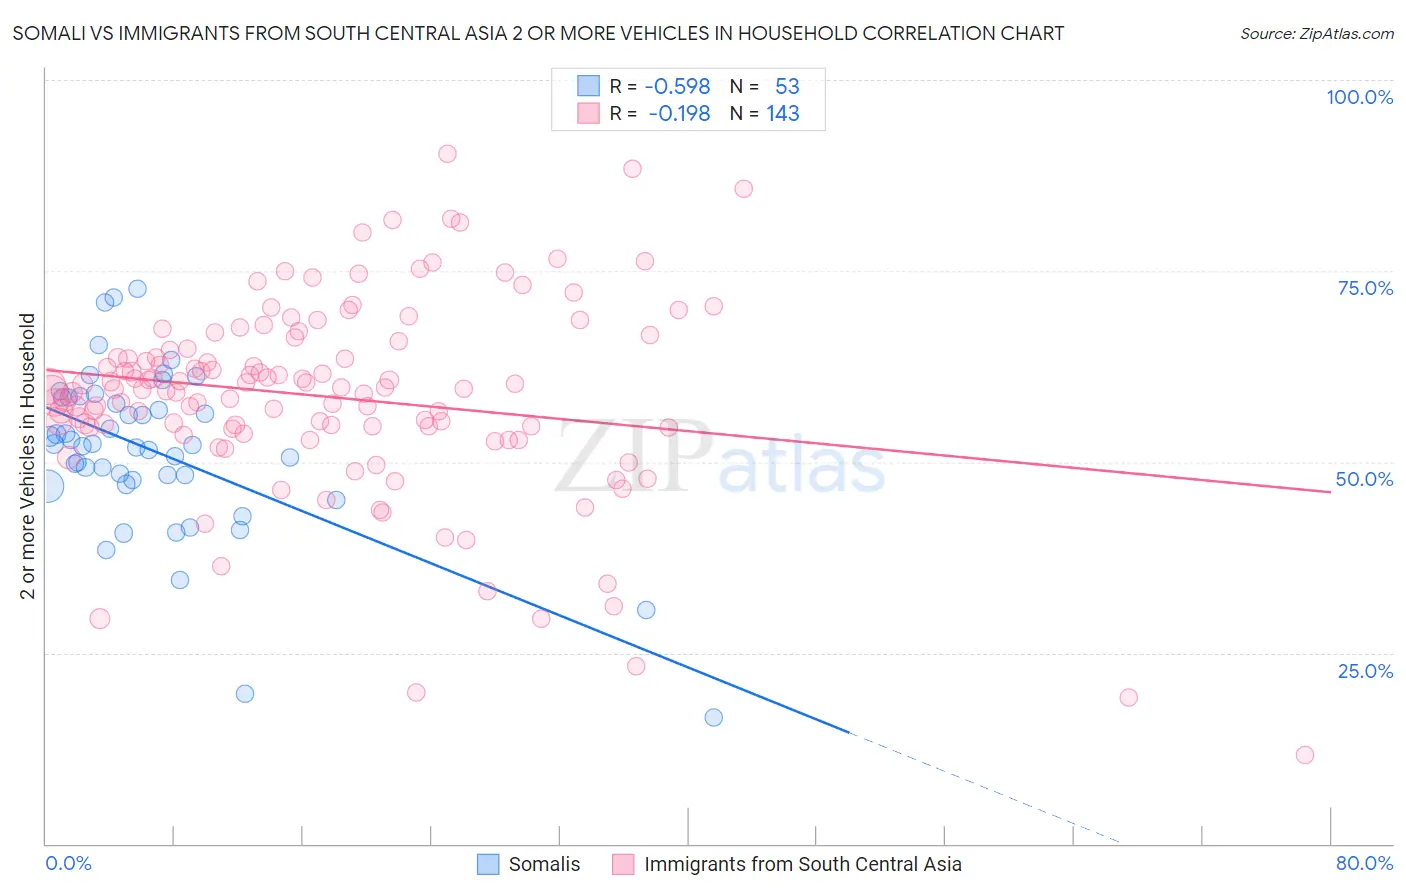 Somali vs Immigrants from South Central Asia 2 or more Vehicles in Household